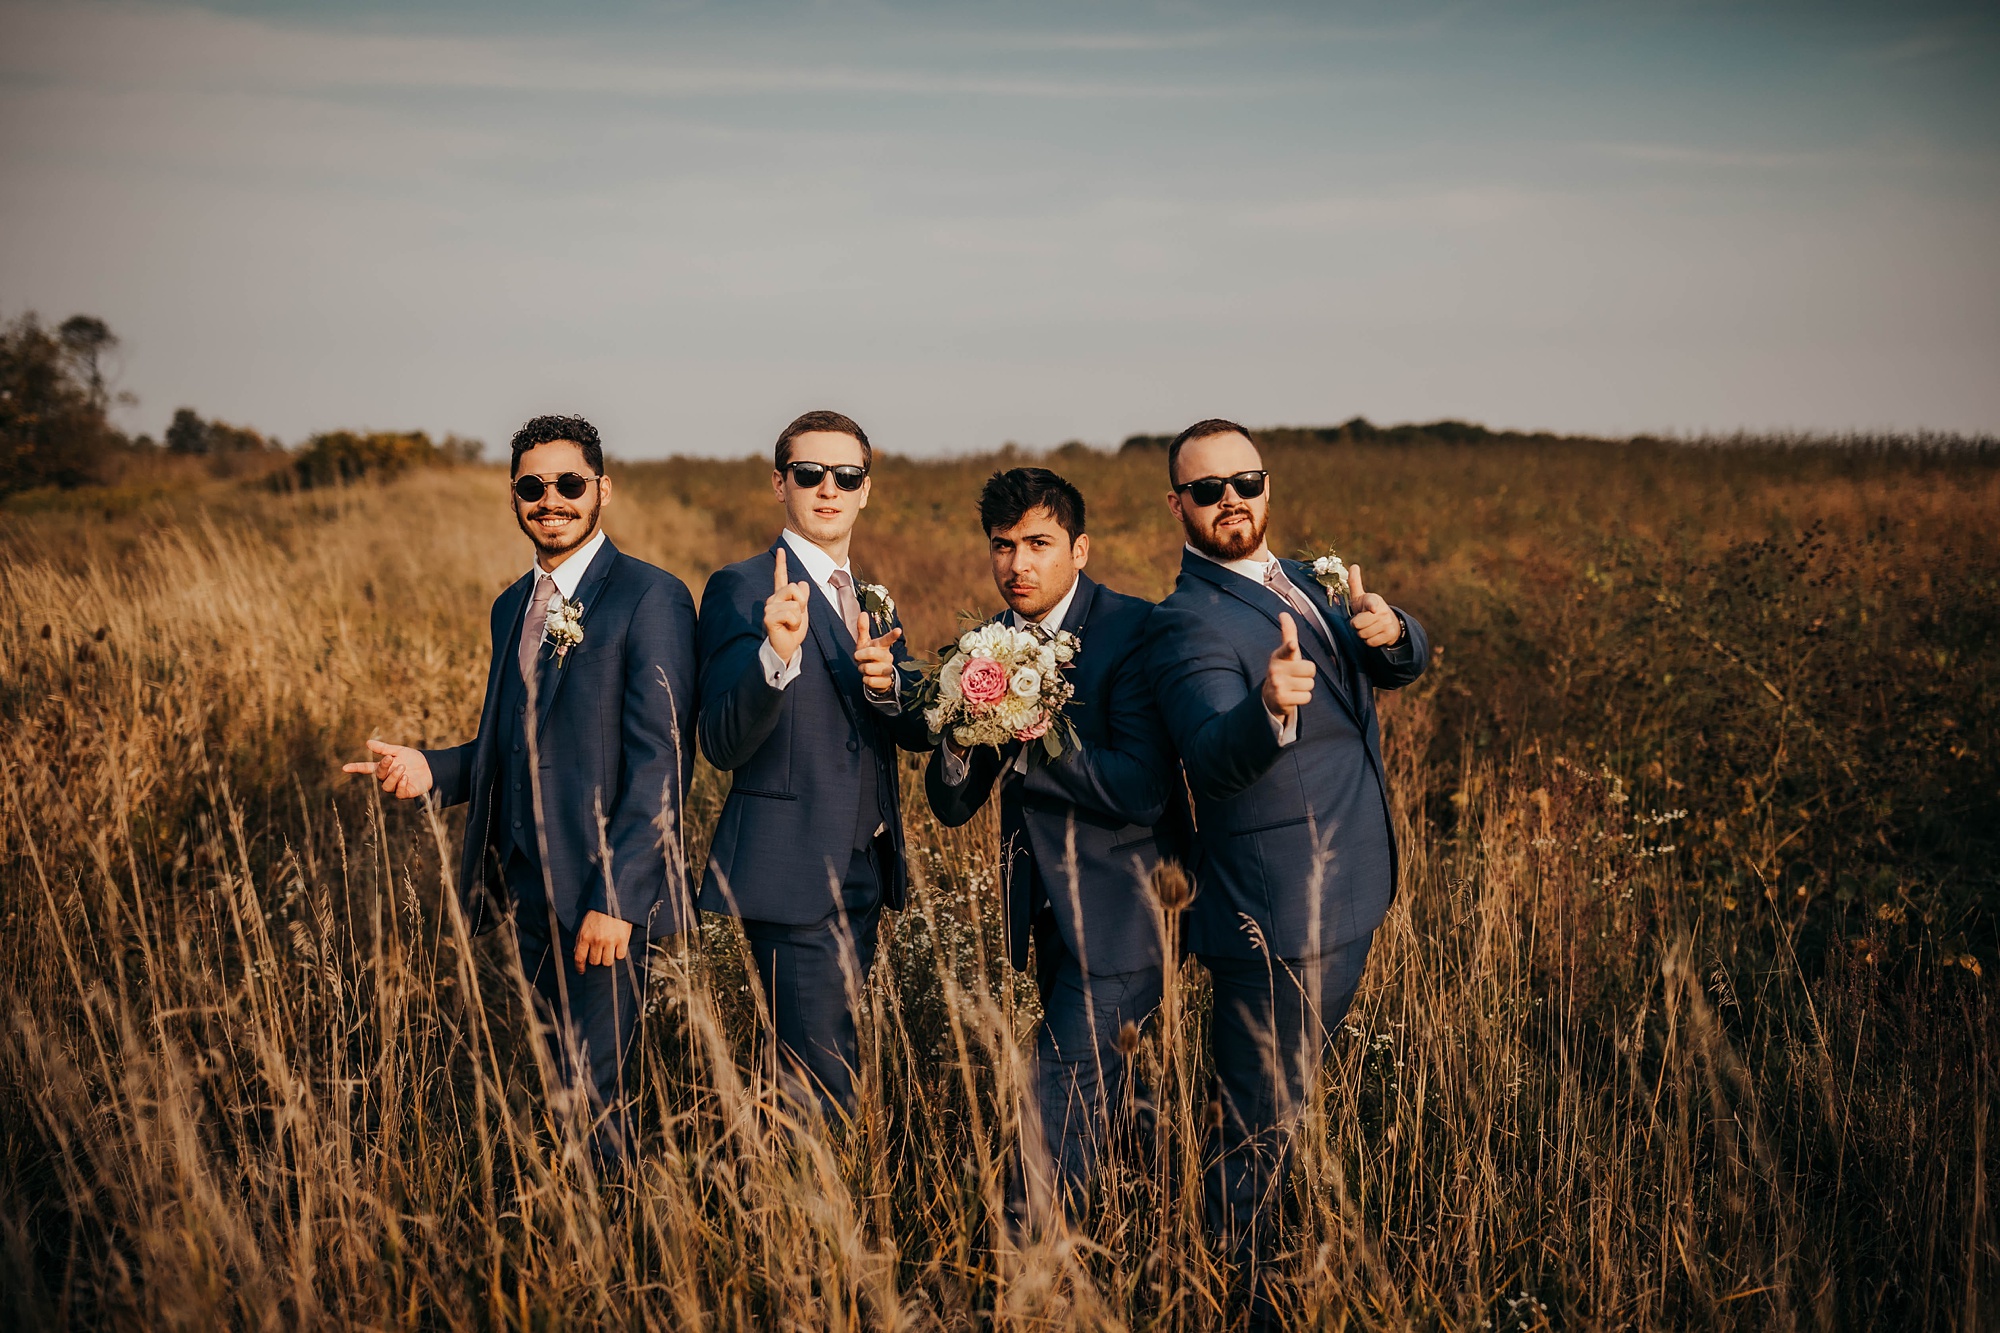 groomsmen pose in the field with sunglasses